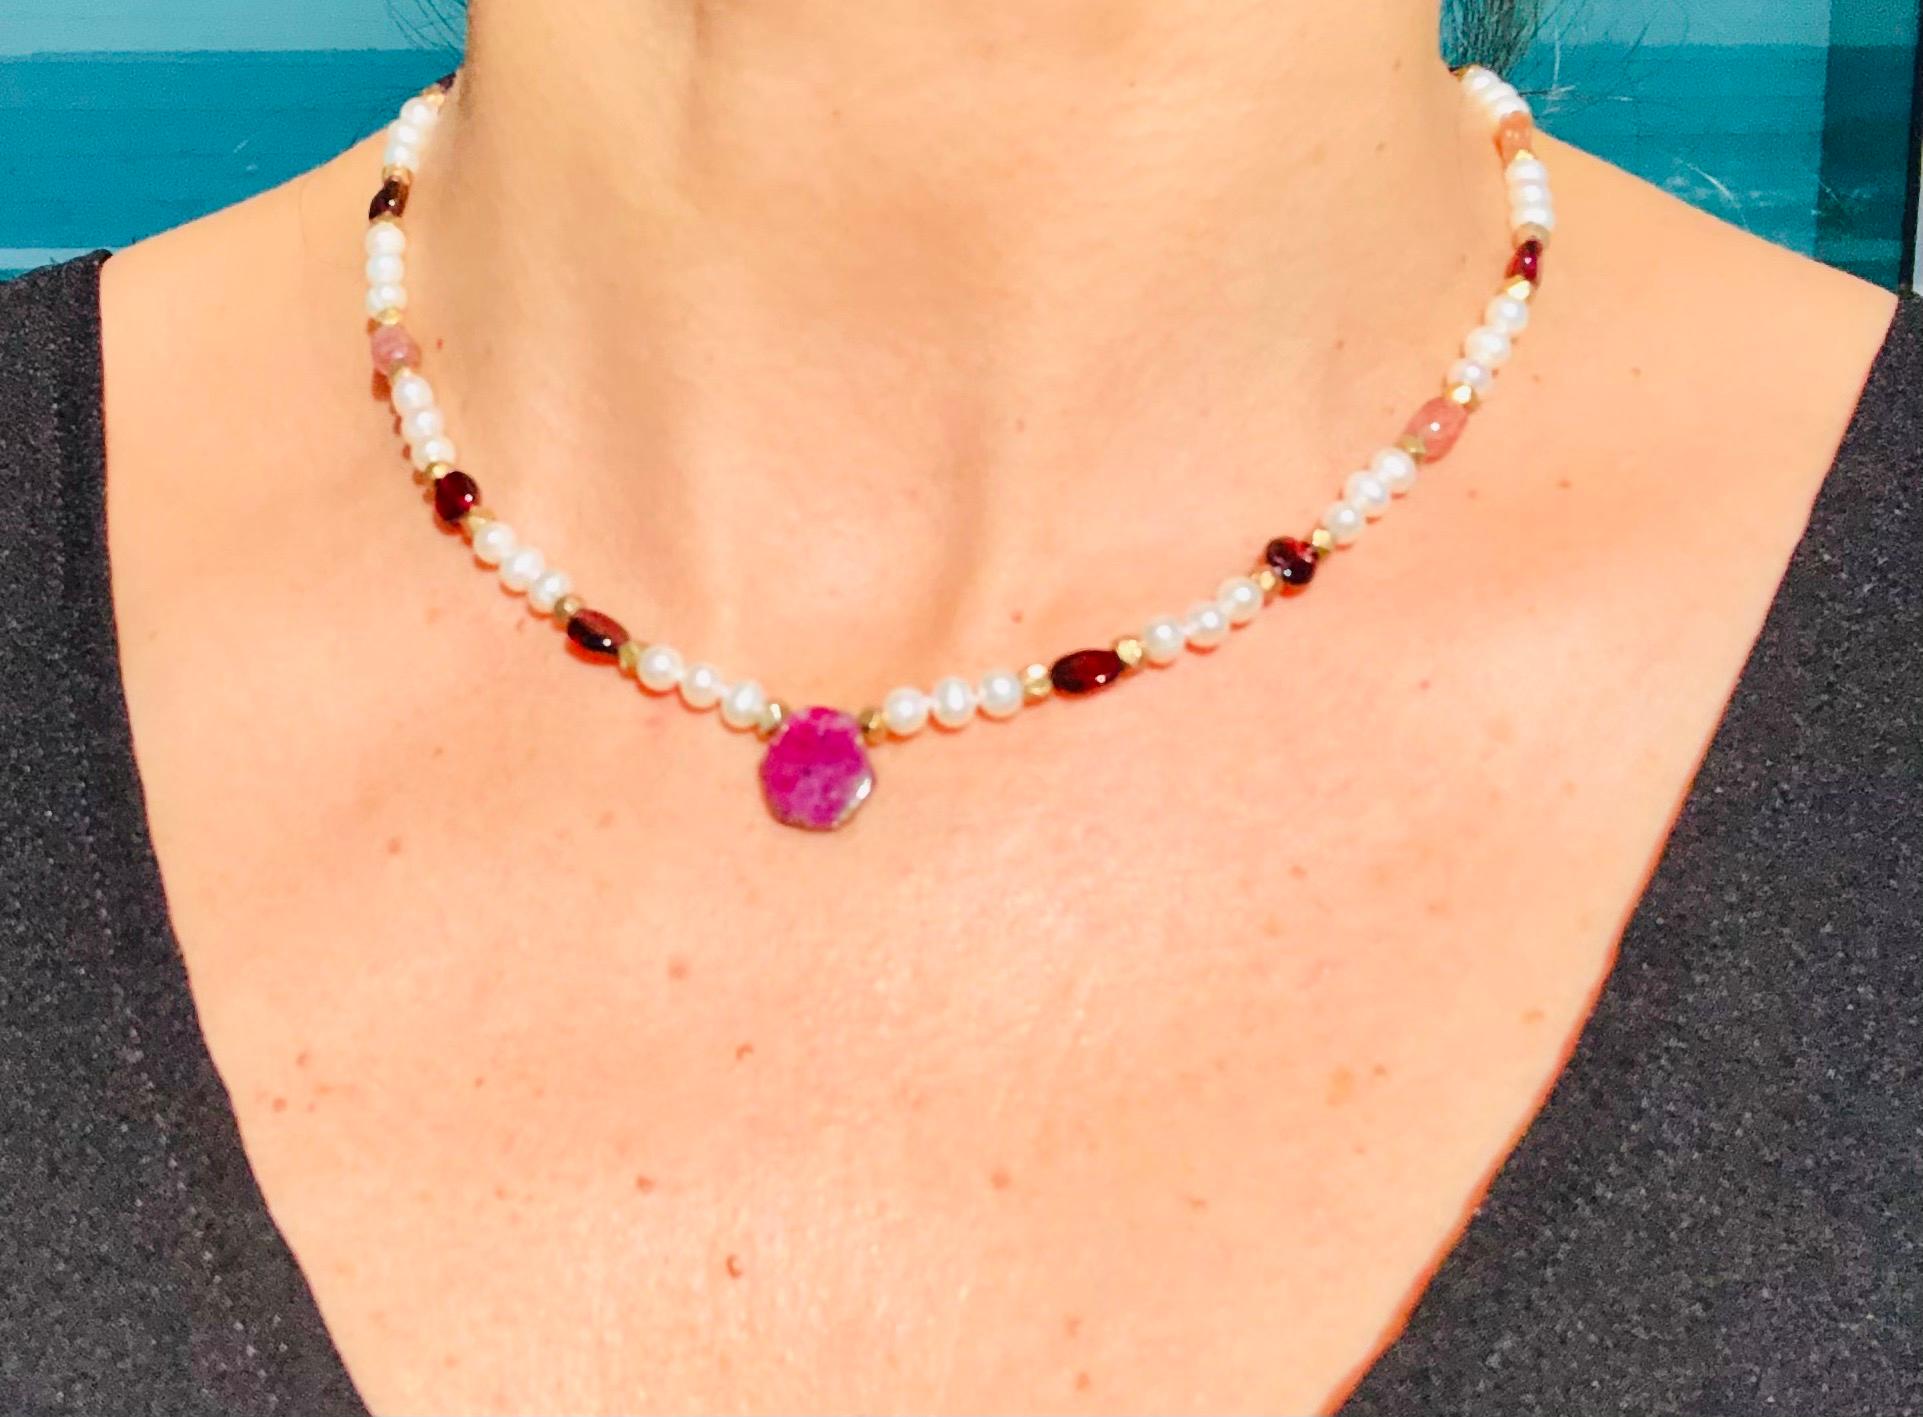 One-of-a-Kind
A small Ruby slice drops from a circlet of Rubies, spinel, and small Pearls. The clasp is vermeil holding a Ruby that matches the drop.
The perfect piece for your granddaughter’s first “real “ jewelry.
Silk hand-knotted
Approx: 17